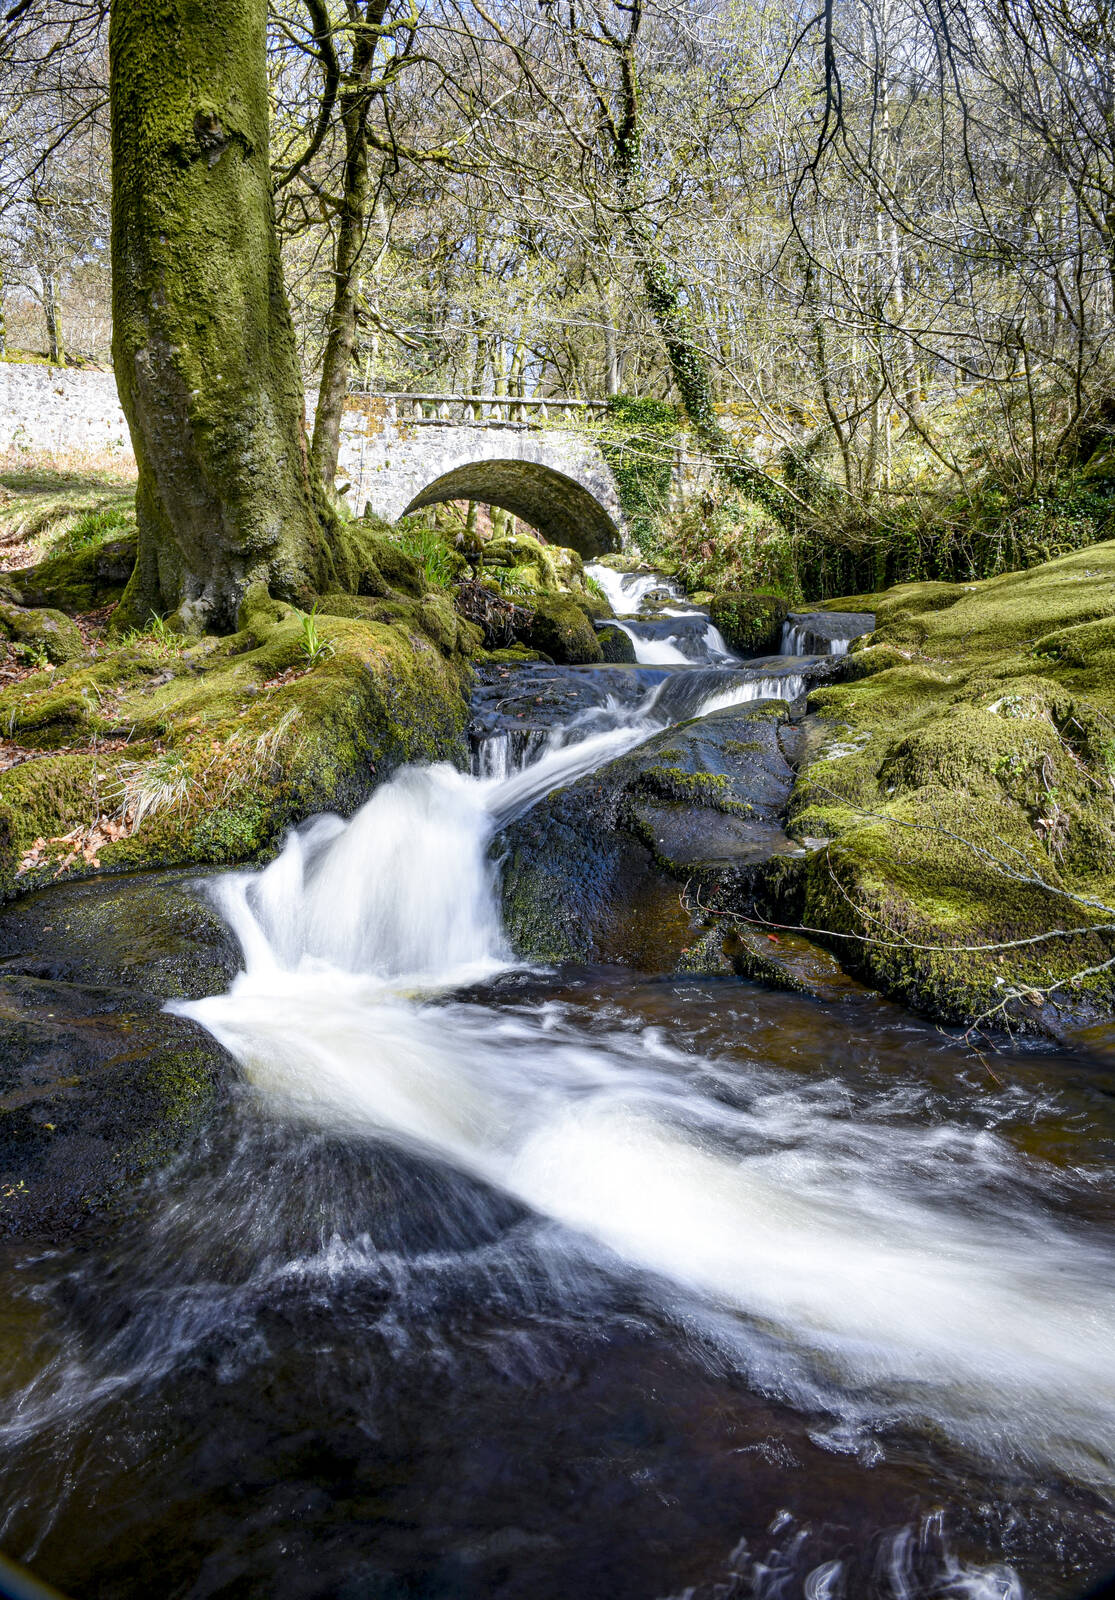 Image of Cloghleagh Cascade by Jill Shepherd